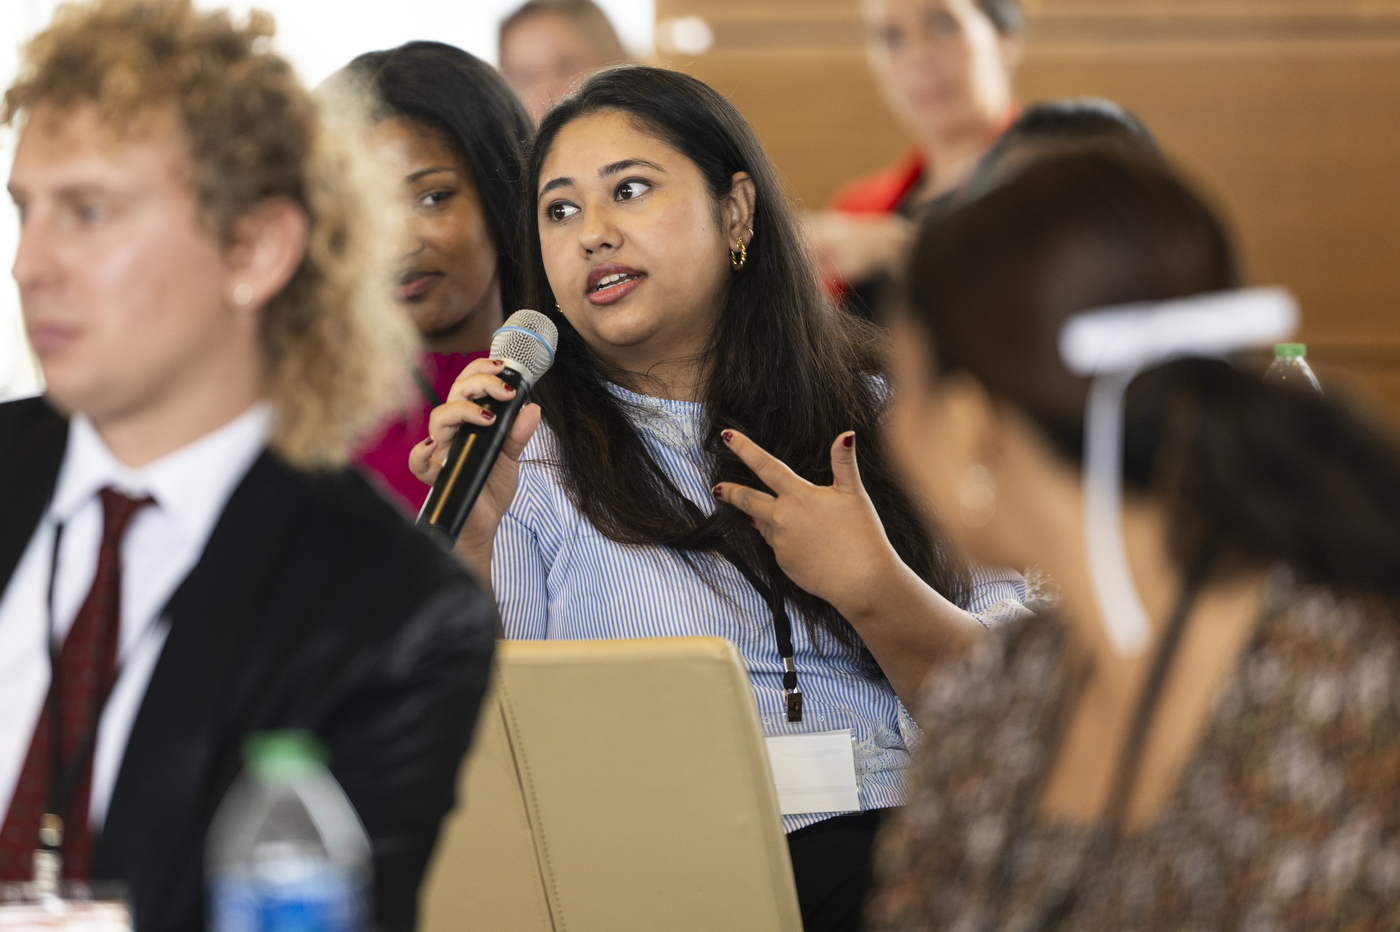 An audience member asks a question into a microphone at the Northeastern University Social Media Summit.